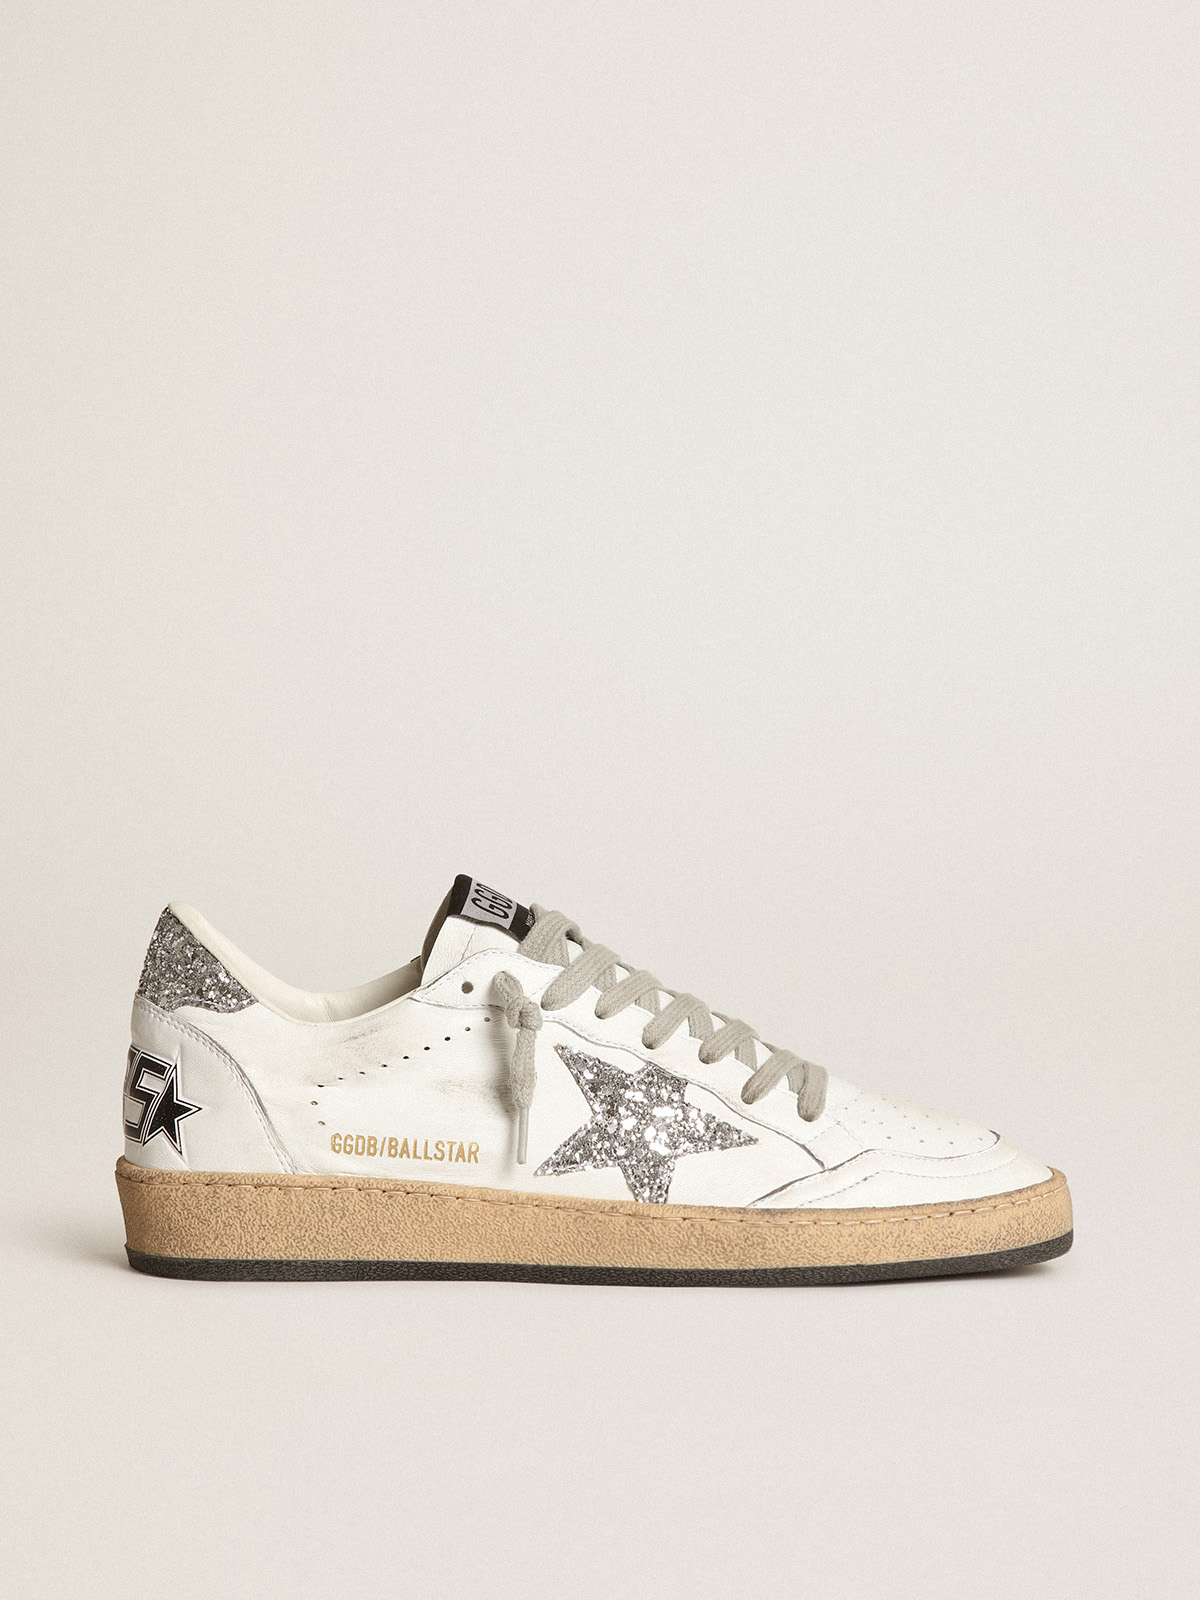 Tb.490 Rife Shimmer Silver Cream Leather Sneakers